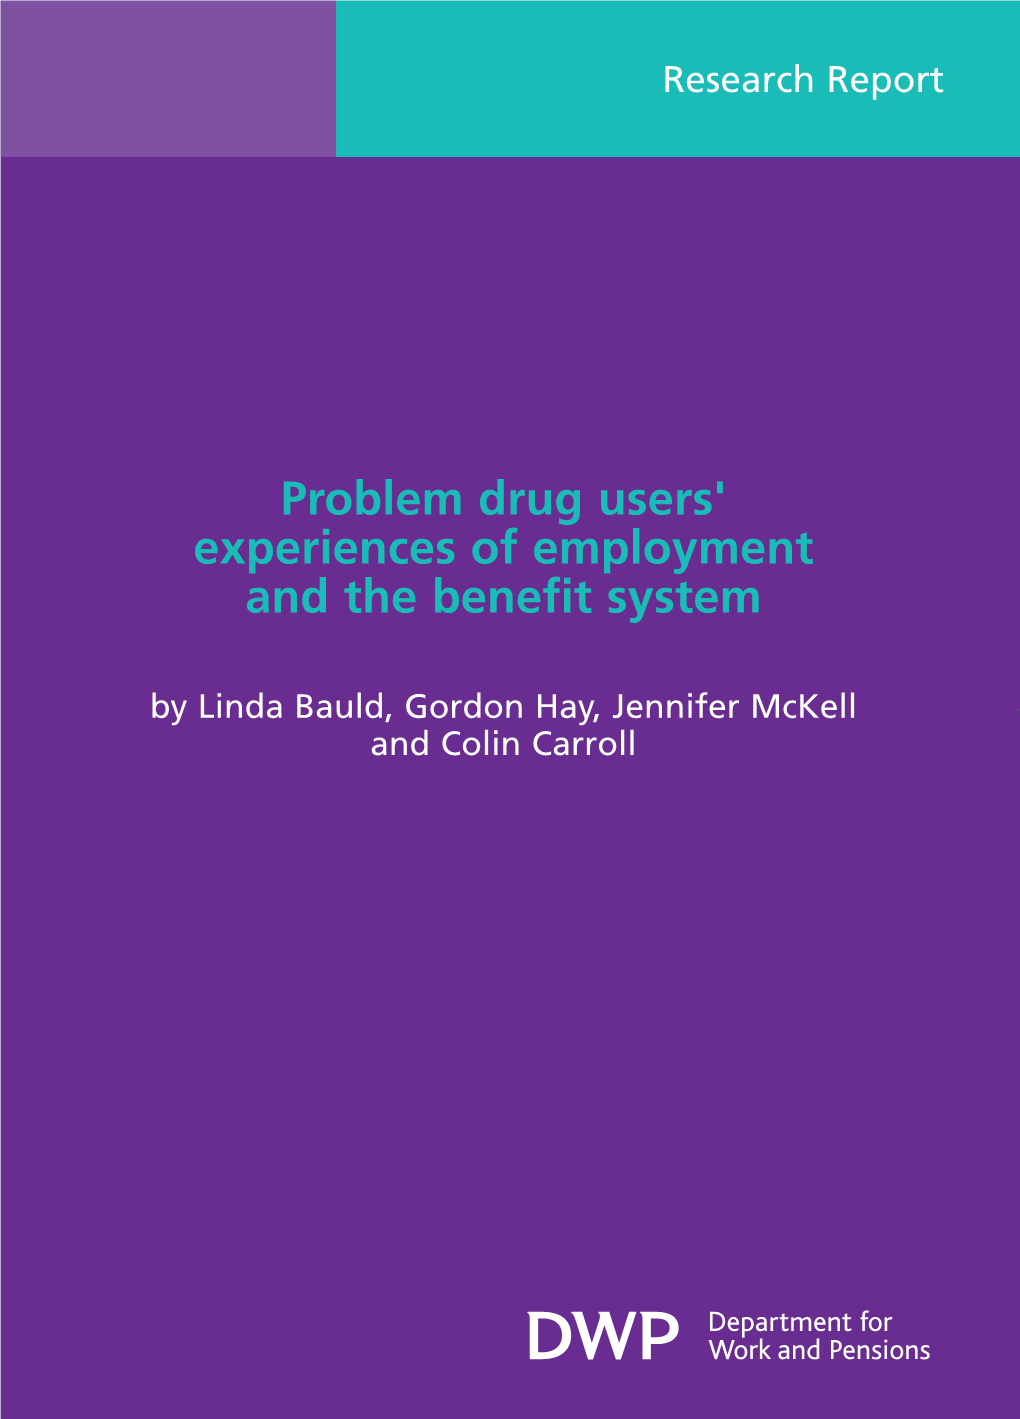 Problem Drug Users' Experiences of Employment and the Benefit System